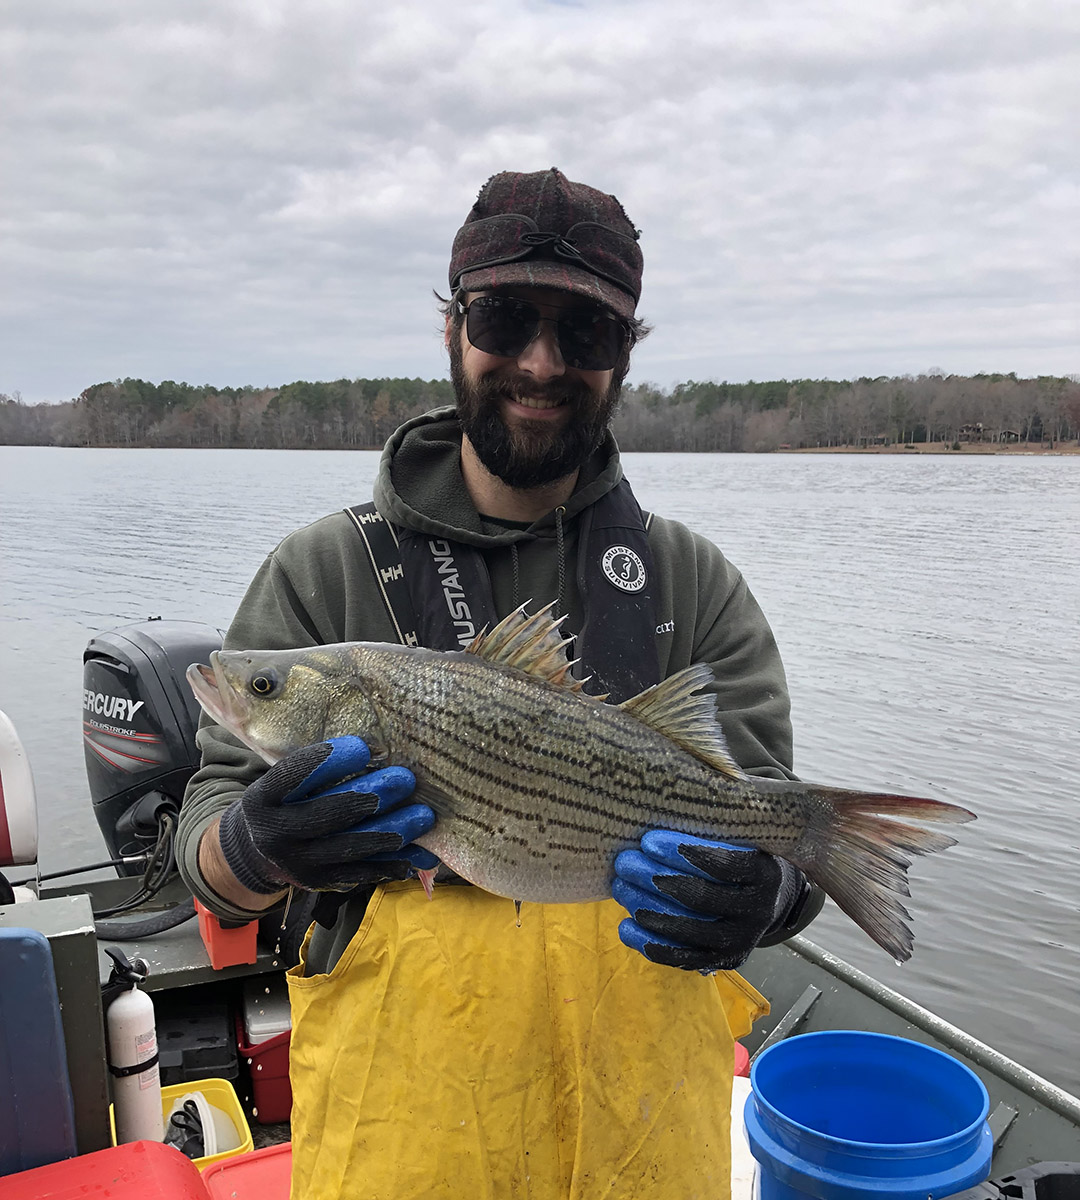 An image of the DWR regional fisheries manager Clint Morgeson holding a hybrid striped bass that was collected from Lake Chesdin during a December sampling.